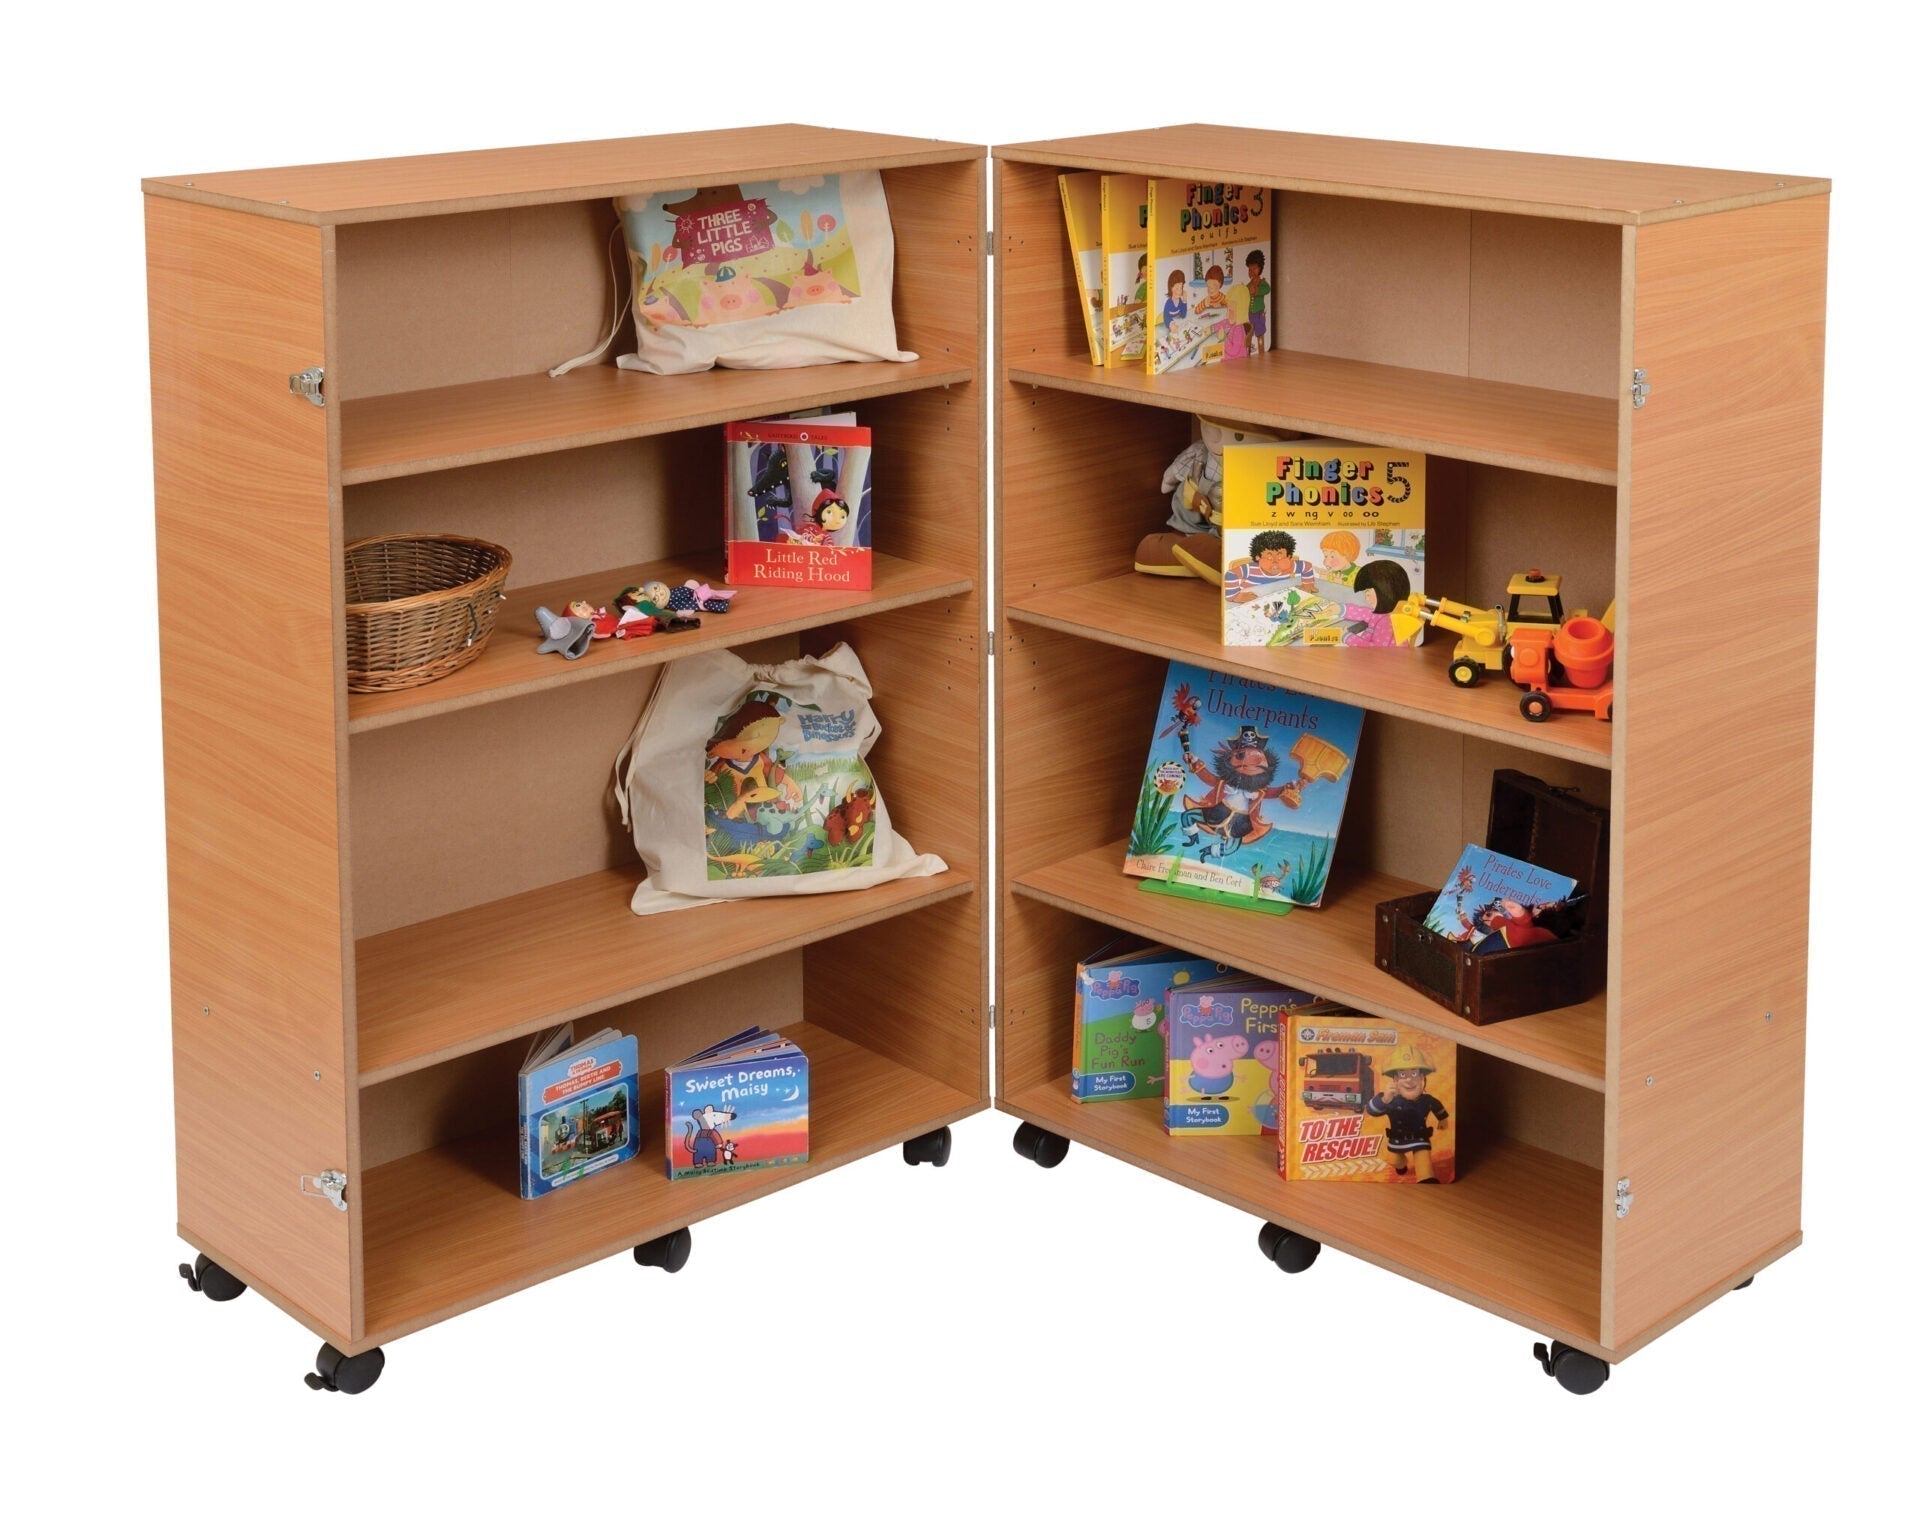 4 Shelf Bookcase Hinged, The 4 Shelf Bookcase Hinged is a versatile and innovative storage solution, designed with both functionality and safety in mind. Its unique hinged design makes it especially suitable for educational environments like schools and EYFS (Early Years Foundation Stage) settings. 4 Shelf Bookcase Hinged Features: Double-Sided Design: This 4 Shelf Bookcase Hinged is double-sided, providing ample storage space for a variety of books, educational materials, or display items. Flexible Hinged 